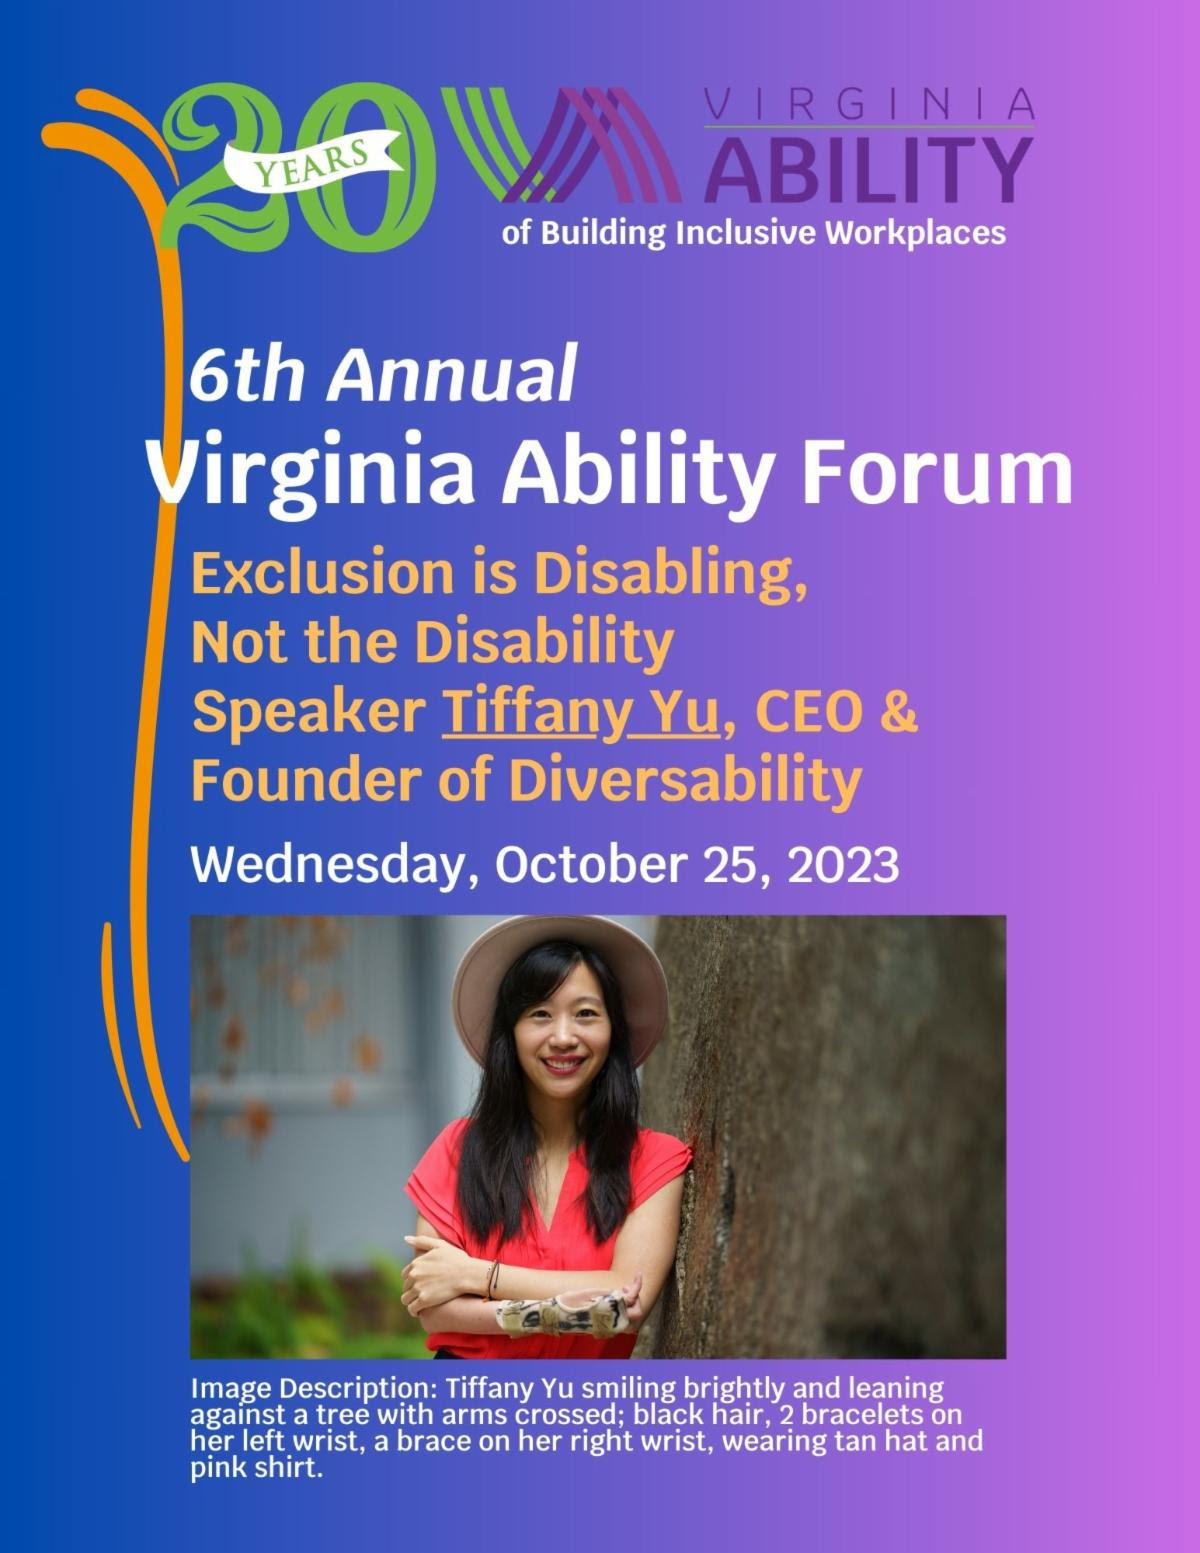 6th annual Virginia Ability Forum Exclusion is Disabling, Not the Disability